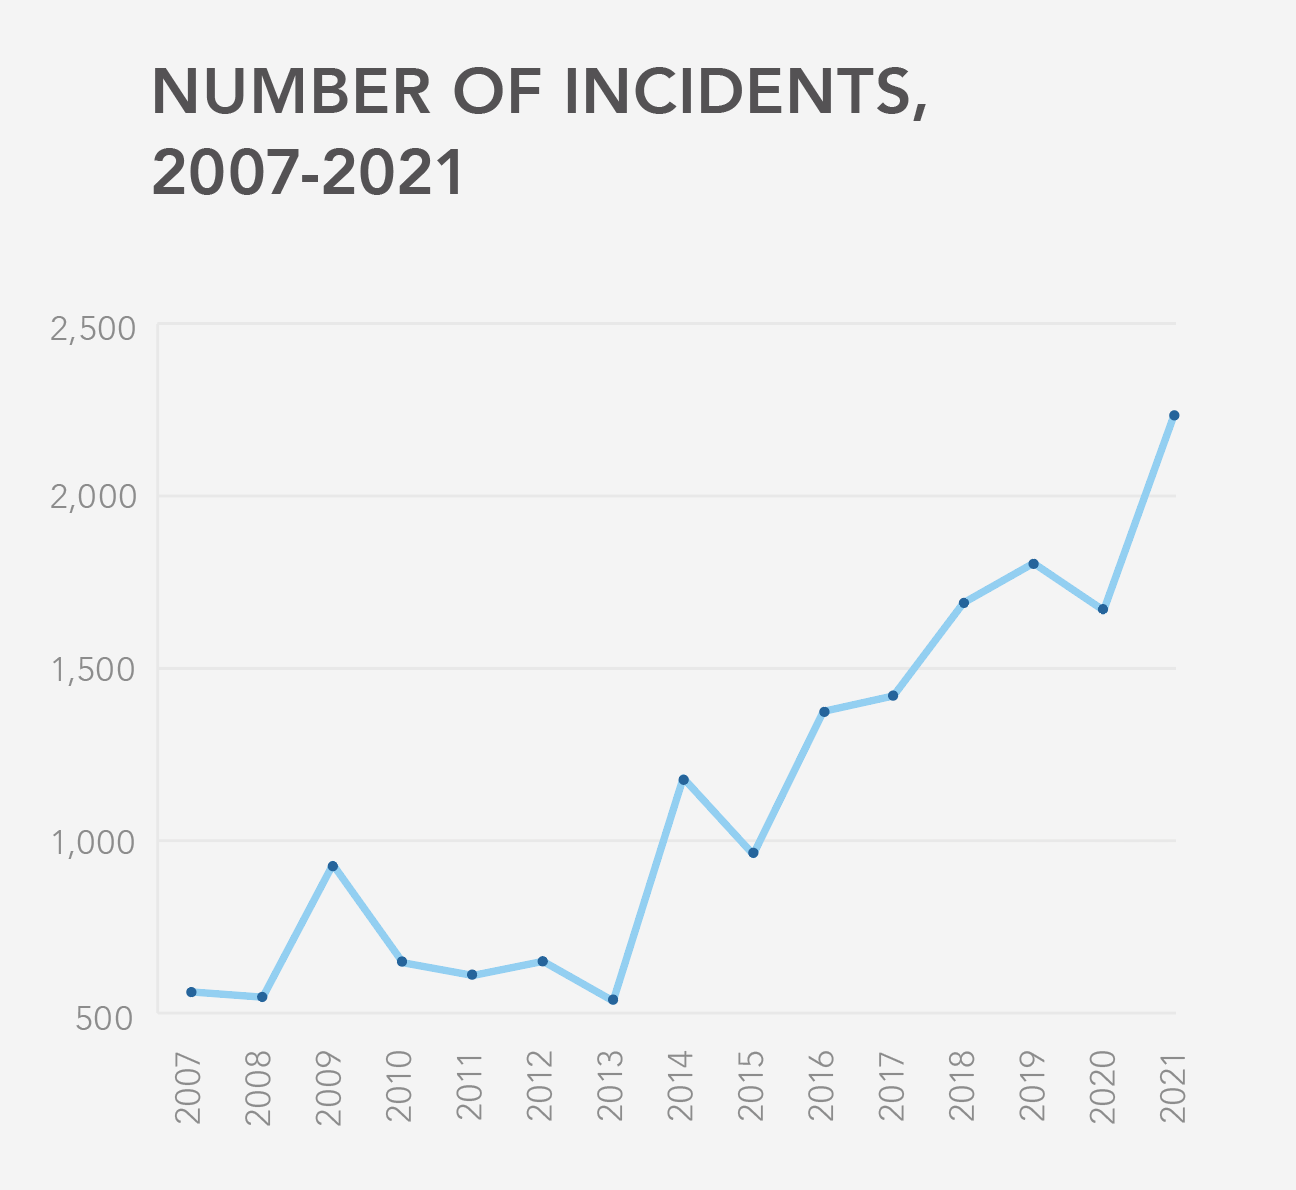 The Community Security Trust saw a record high number of incidents in 2021